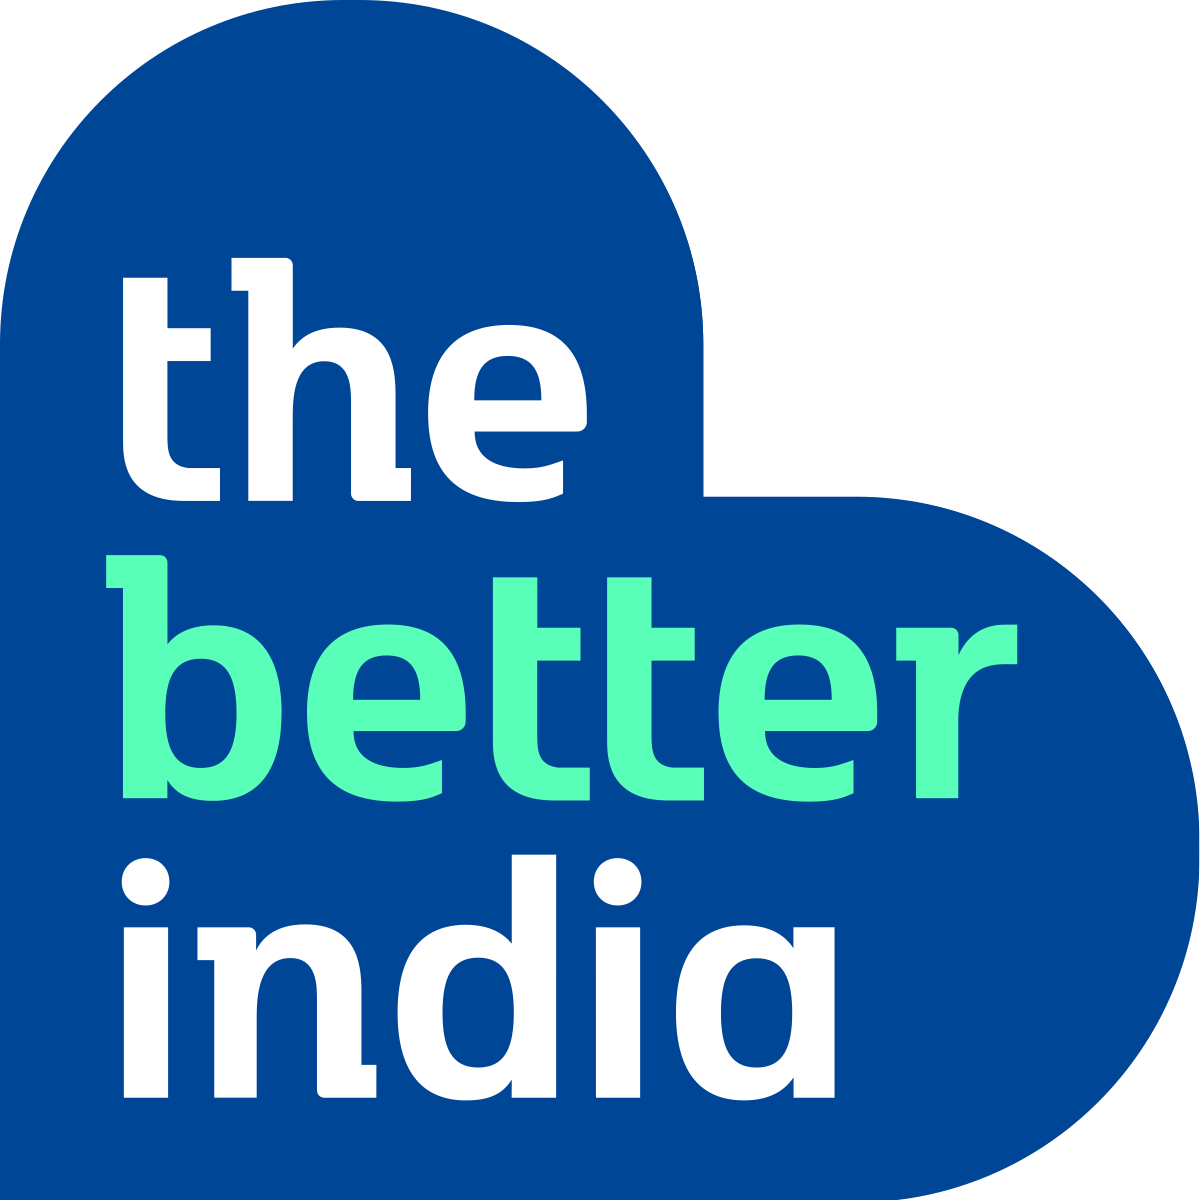 The Better India